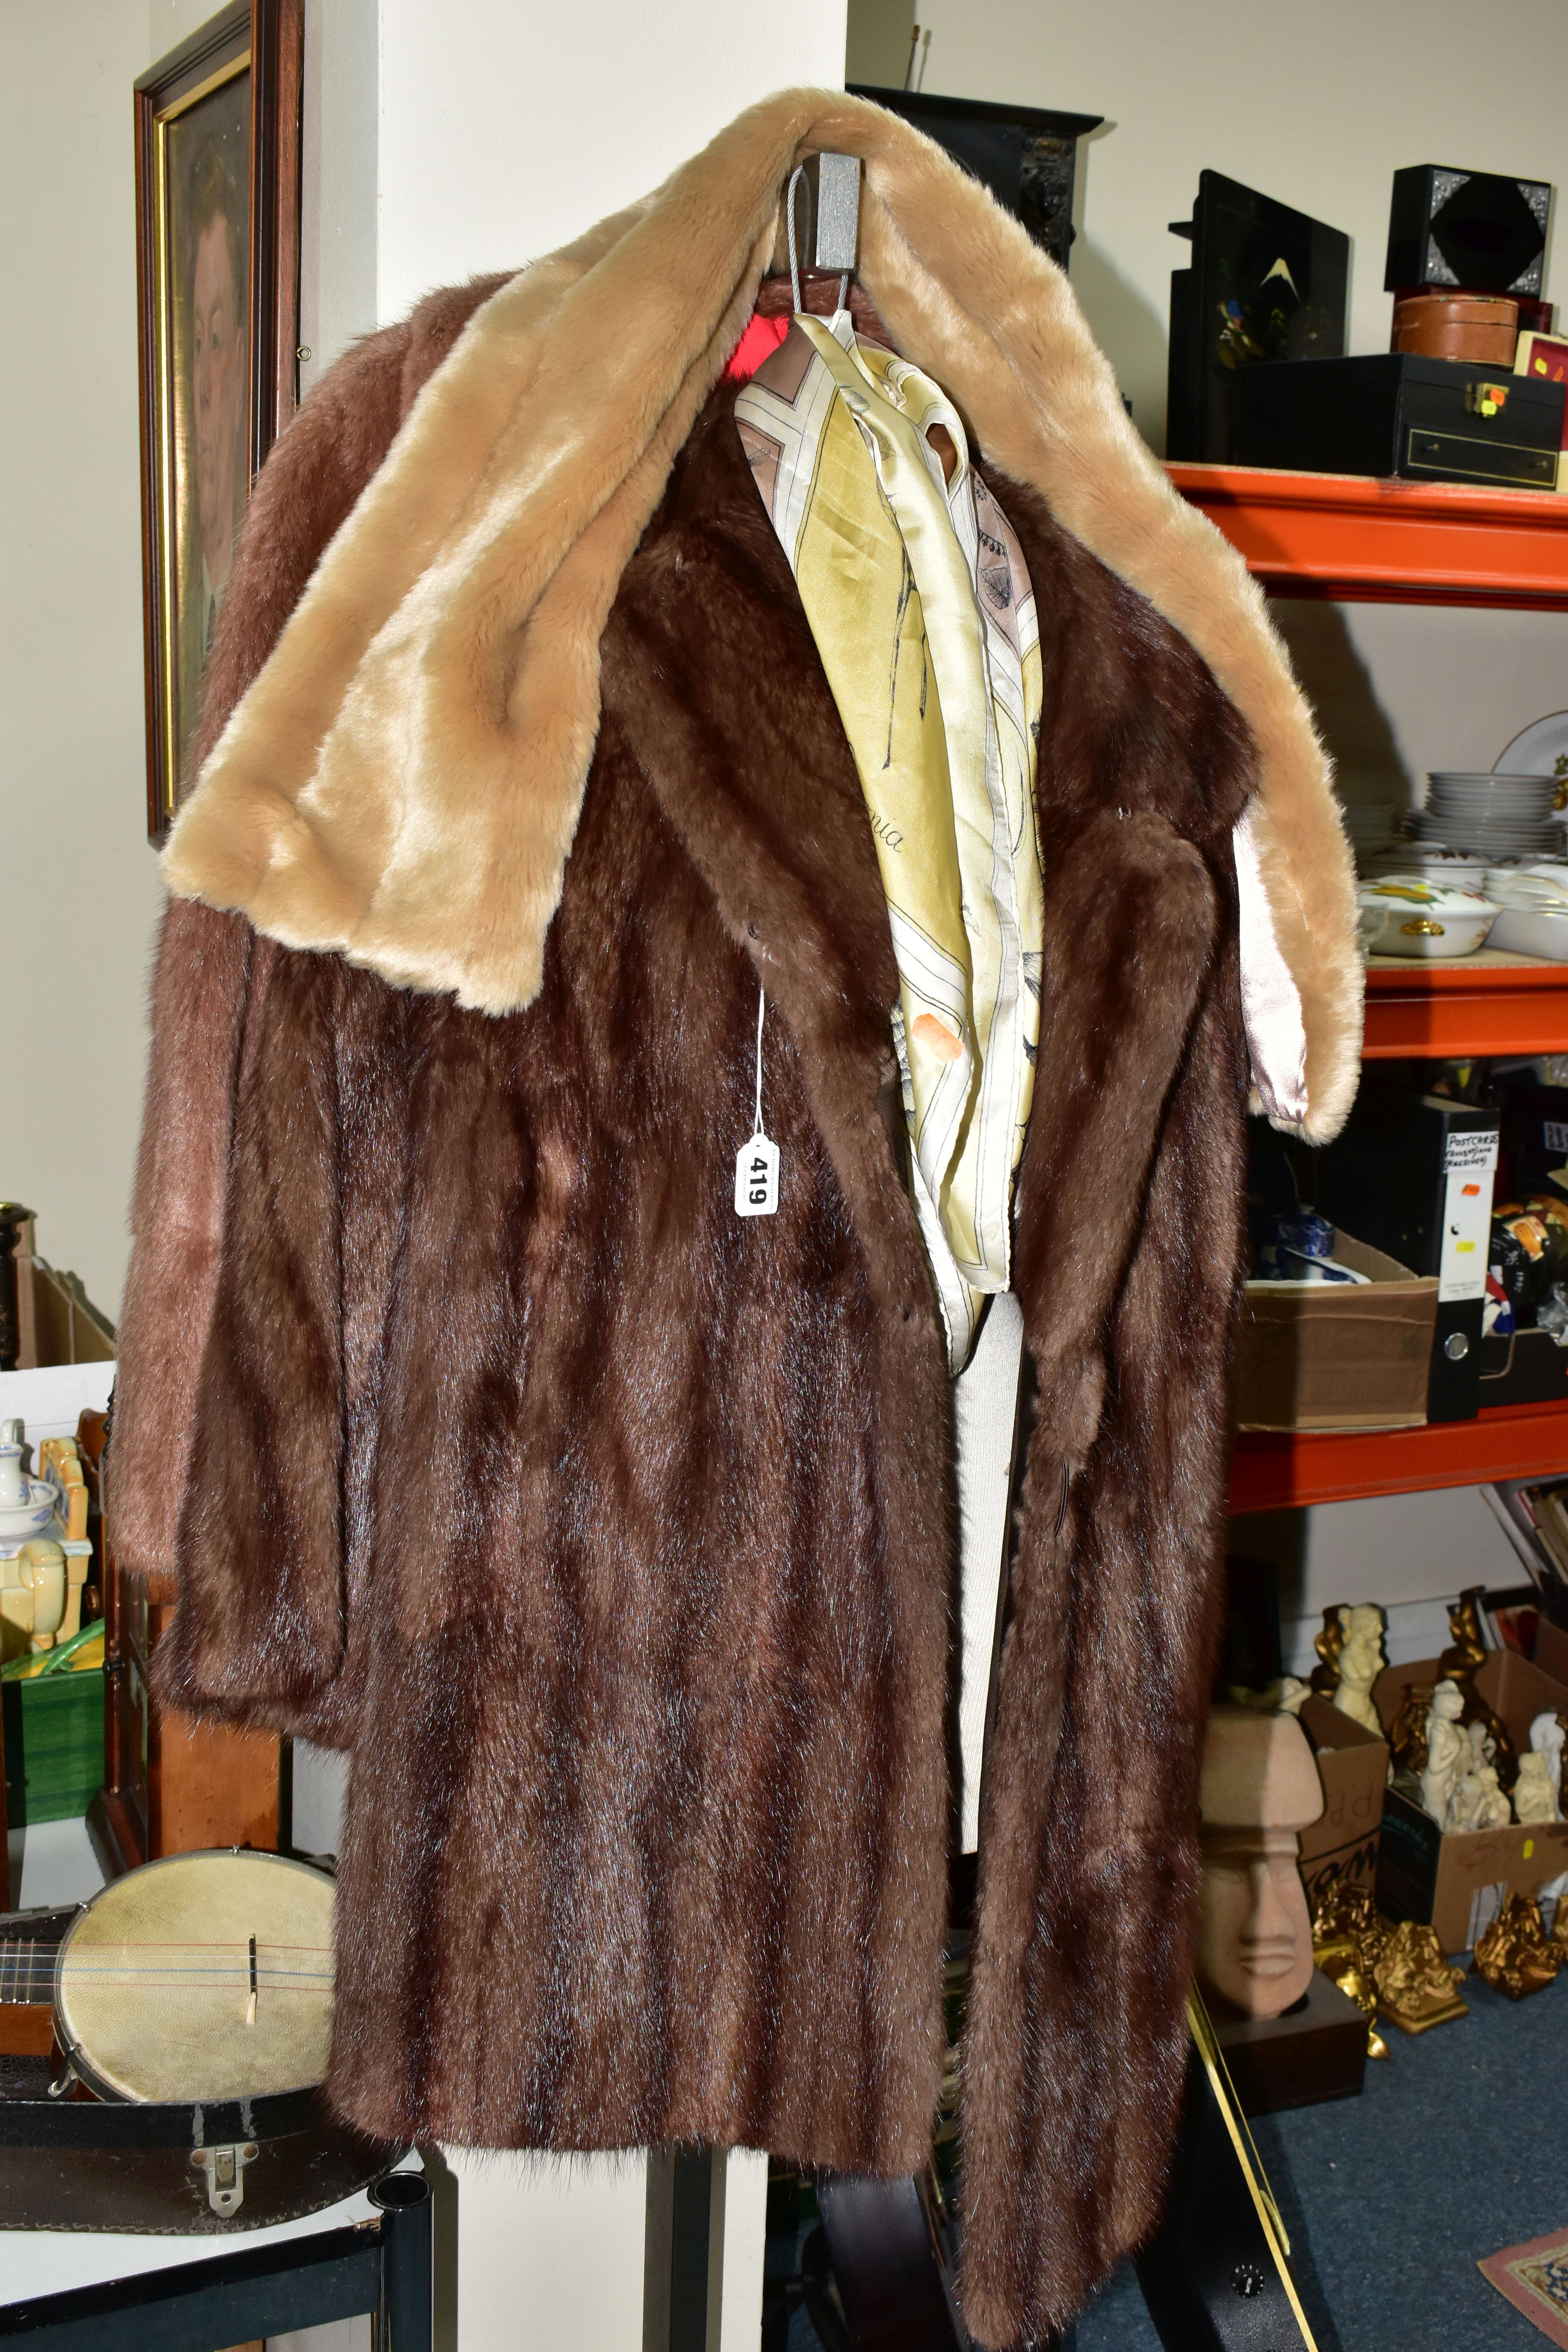 TWO UNBRANDED FURS AND WALKING STICKS ETC, comprising a brown fur coat, a light brown jacket, a faux